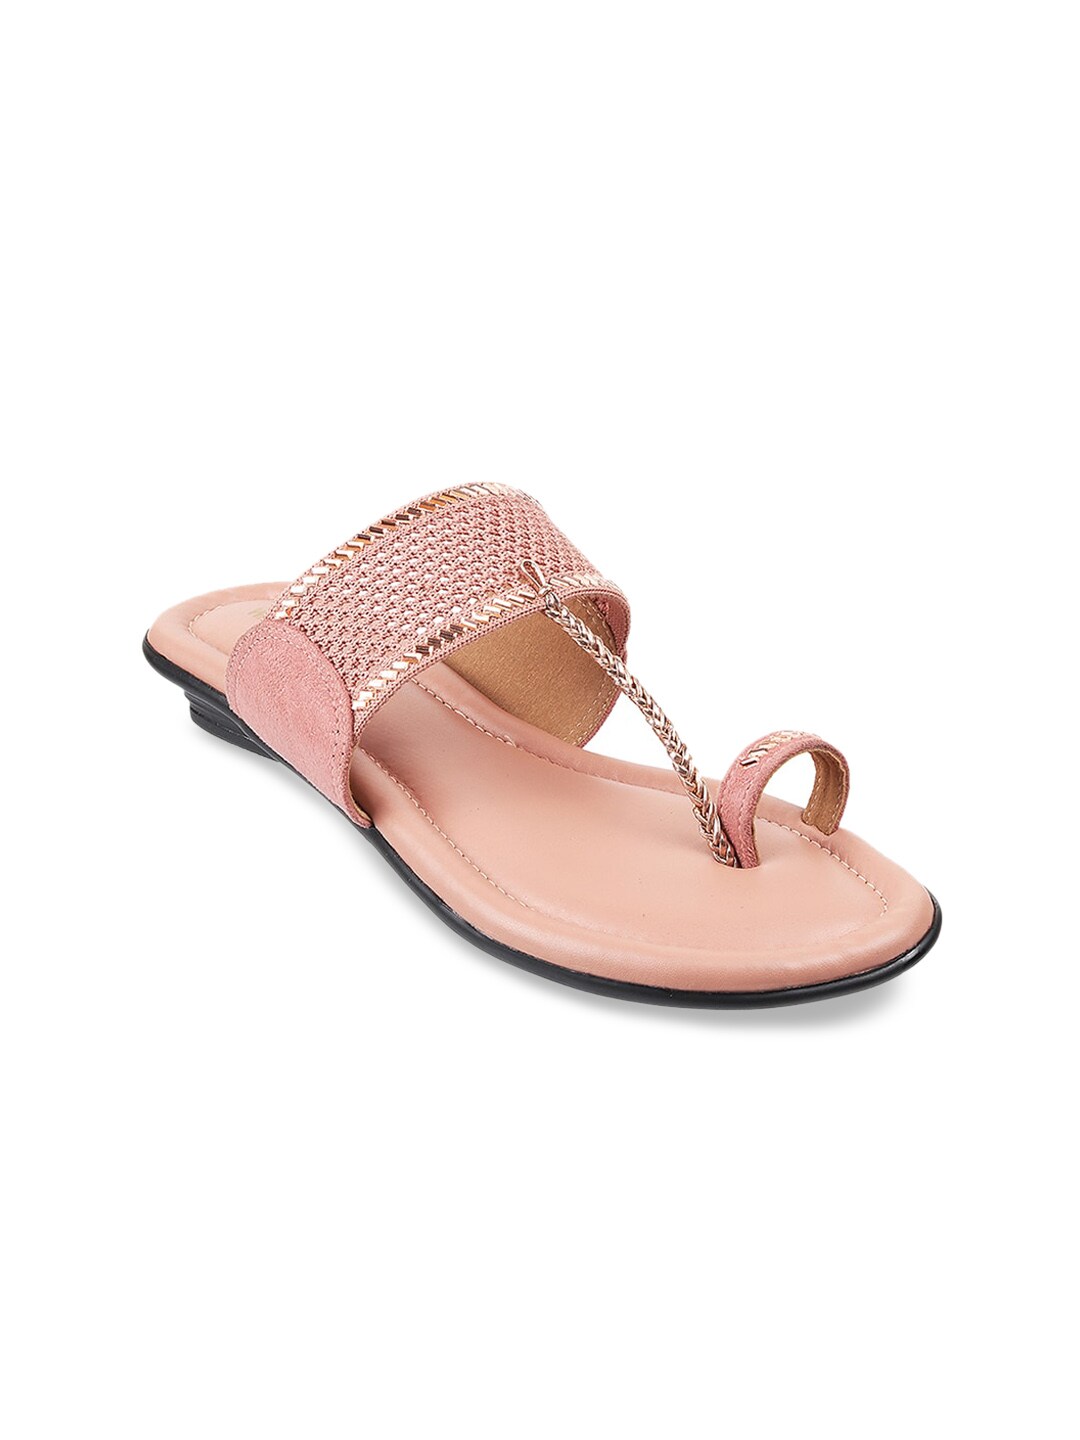 WALKWAY by Metro Women Peach-Coloured One Toe Flats Price in India